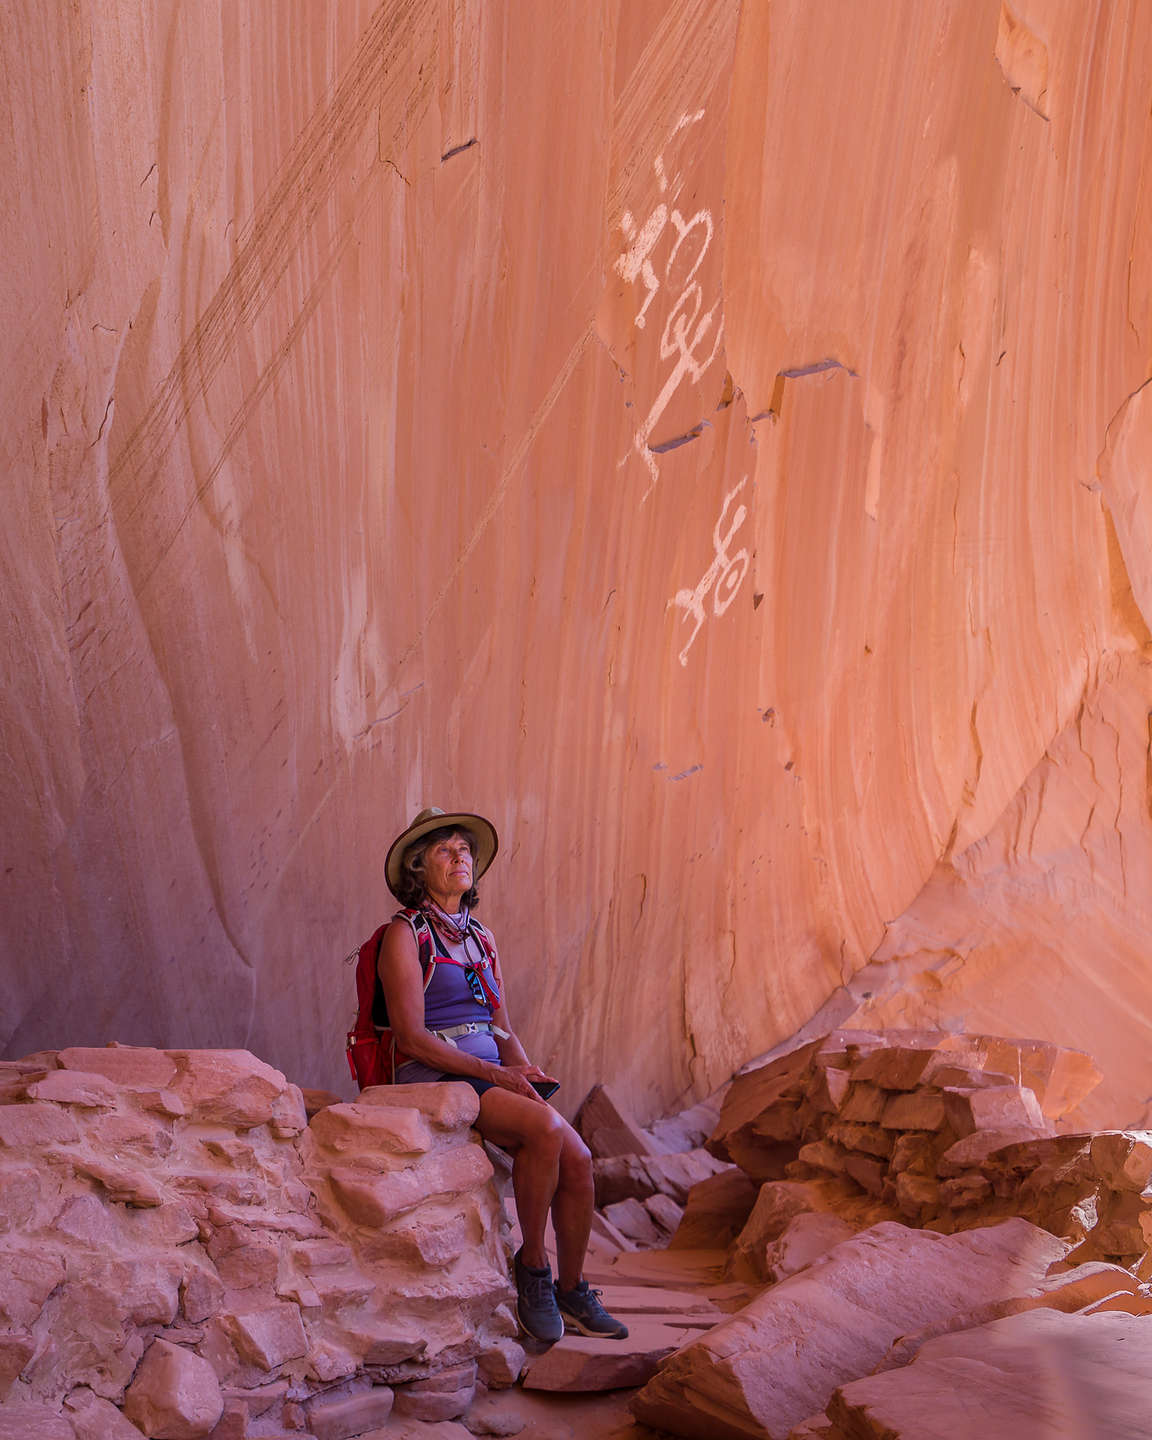 Lolo sitting beneath an anatomically correct pictograph